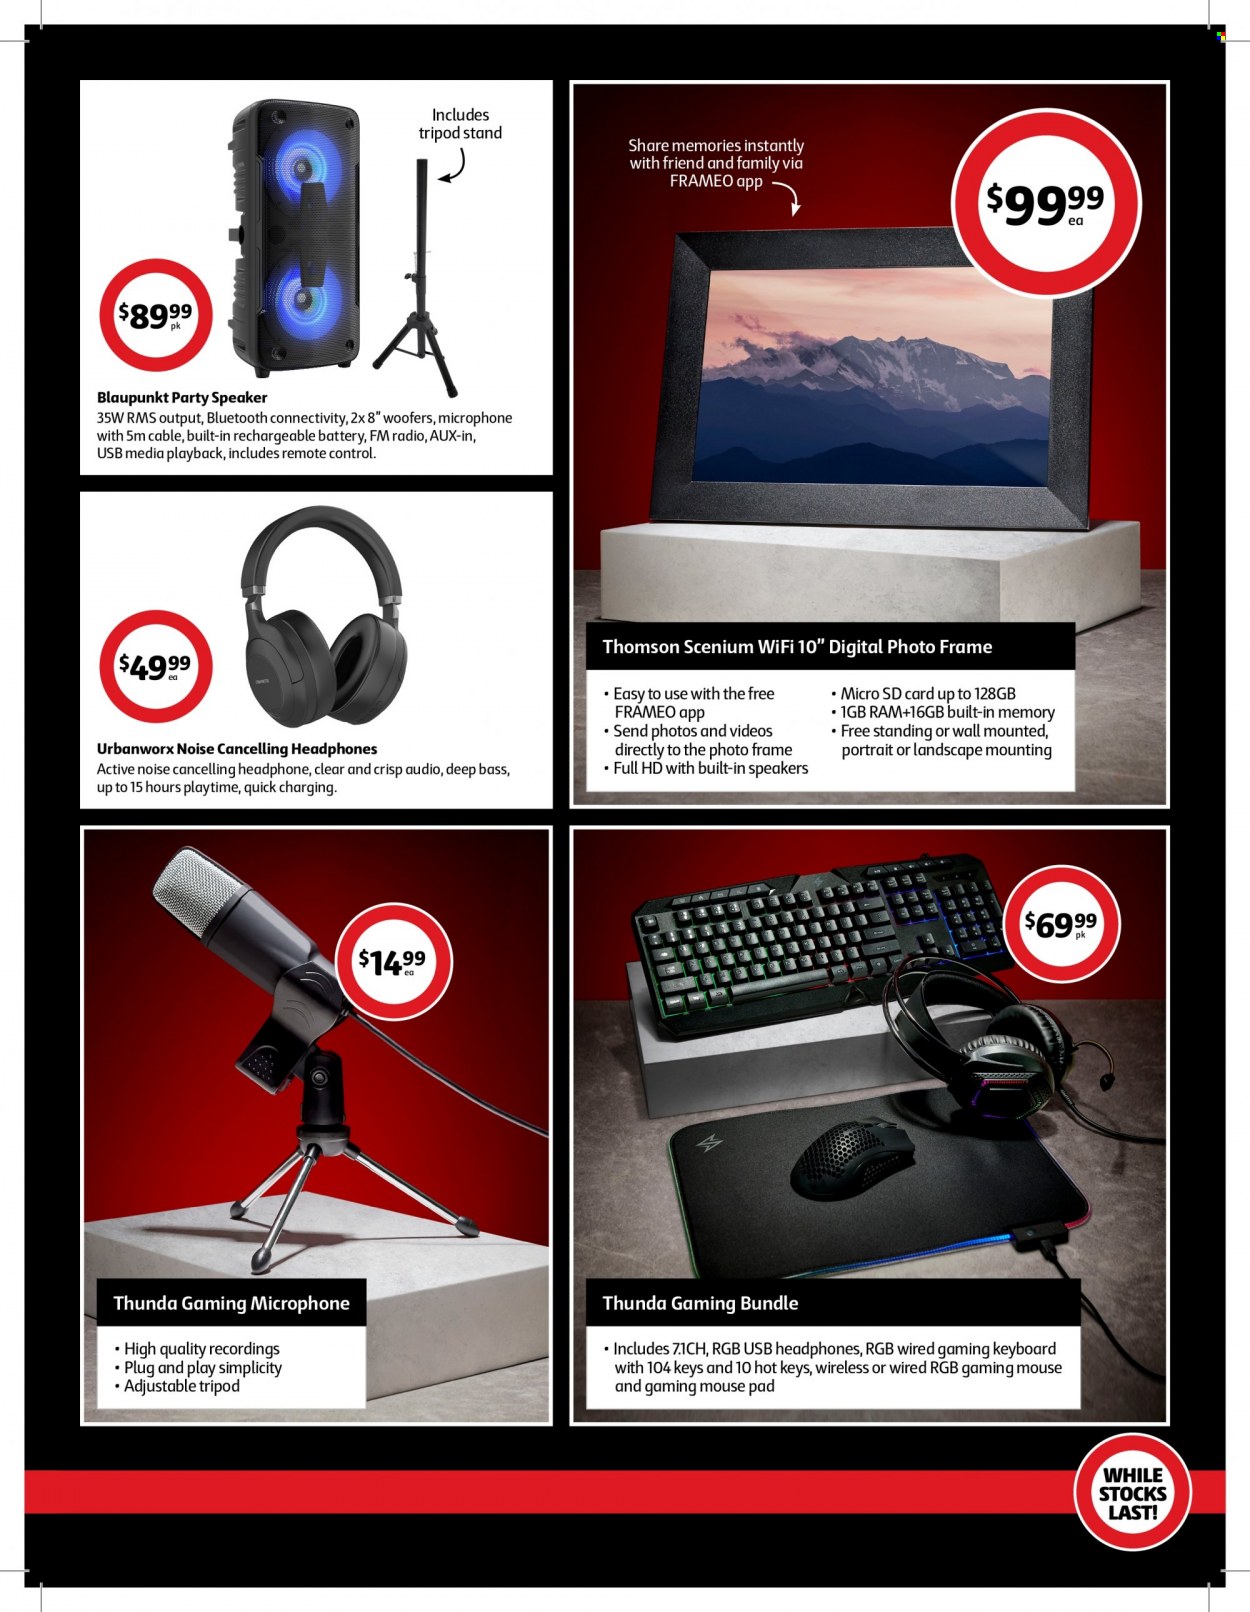 thumbnail - Coles Catalogue - 25 Nov 2022 - 1 Dec 2022 - Sales products - photo frame, rechargeable battery, keyboard, mouse, radio, Thomson, speaker, microphone, headphones, remote control. Page 3.